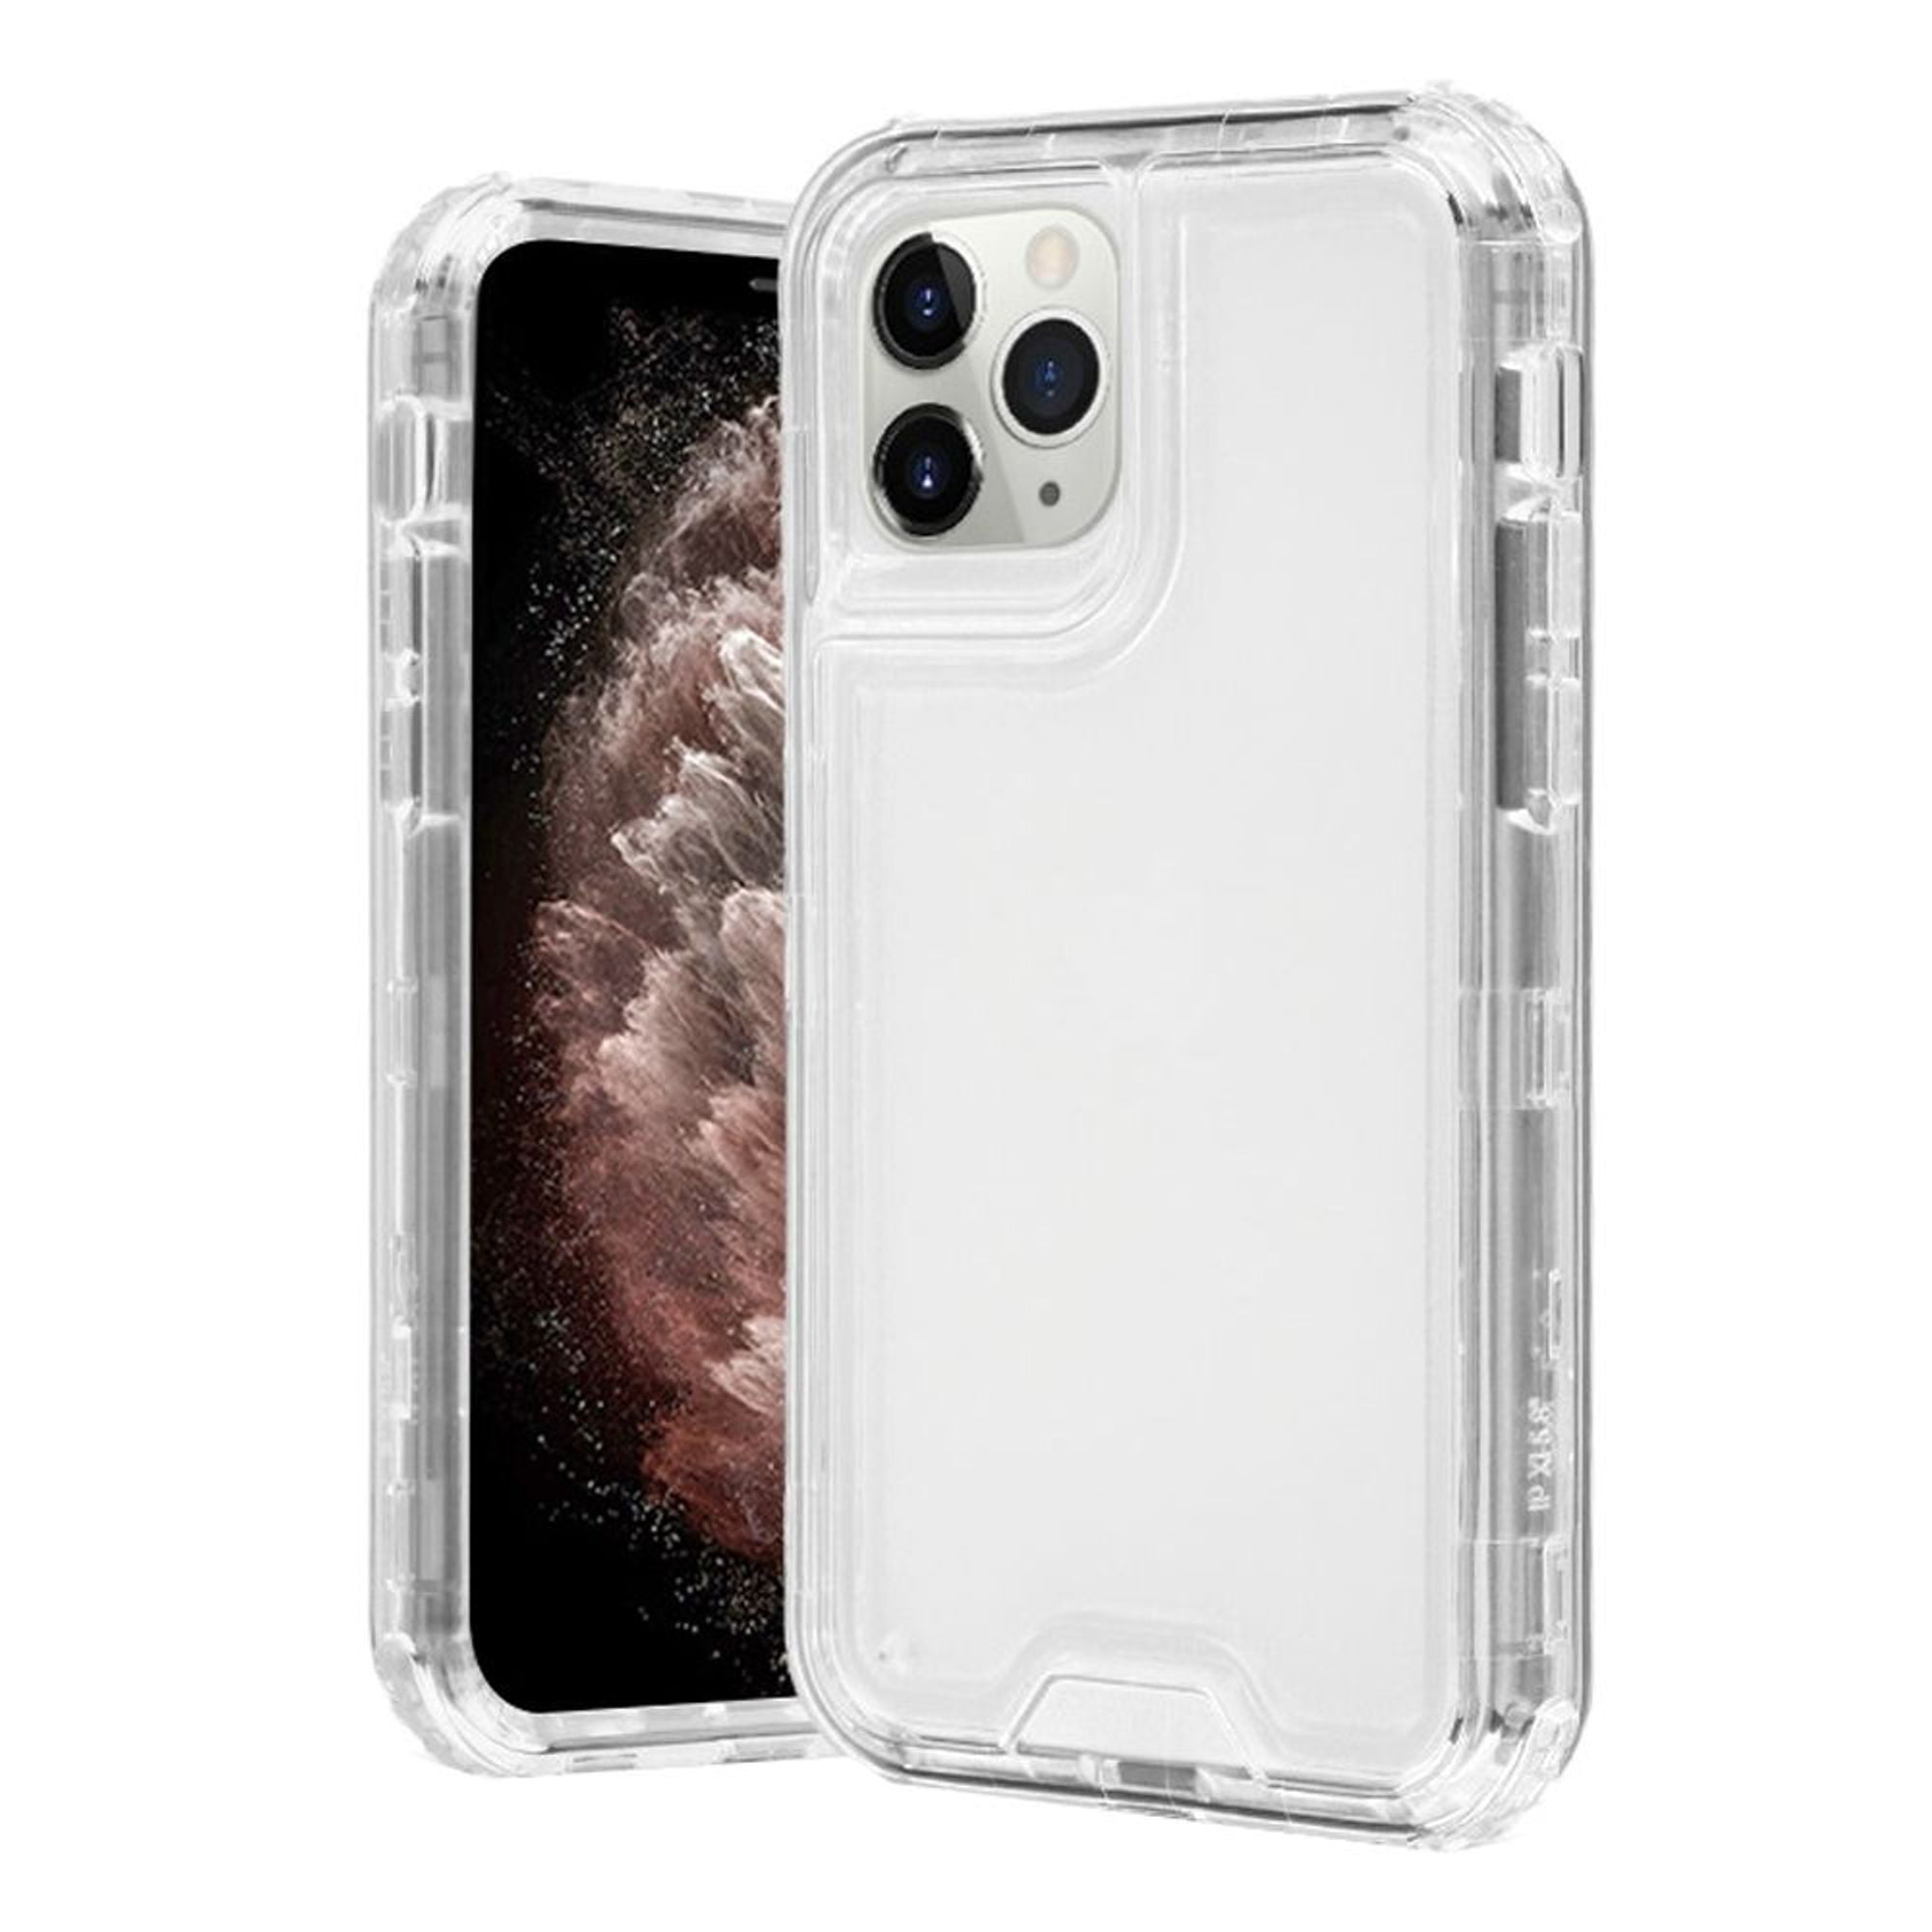 iPhone 11 Pro Max Case, by Insten Dual Layer Hybrid PC/TPU Rubber Case